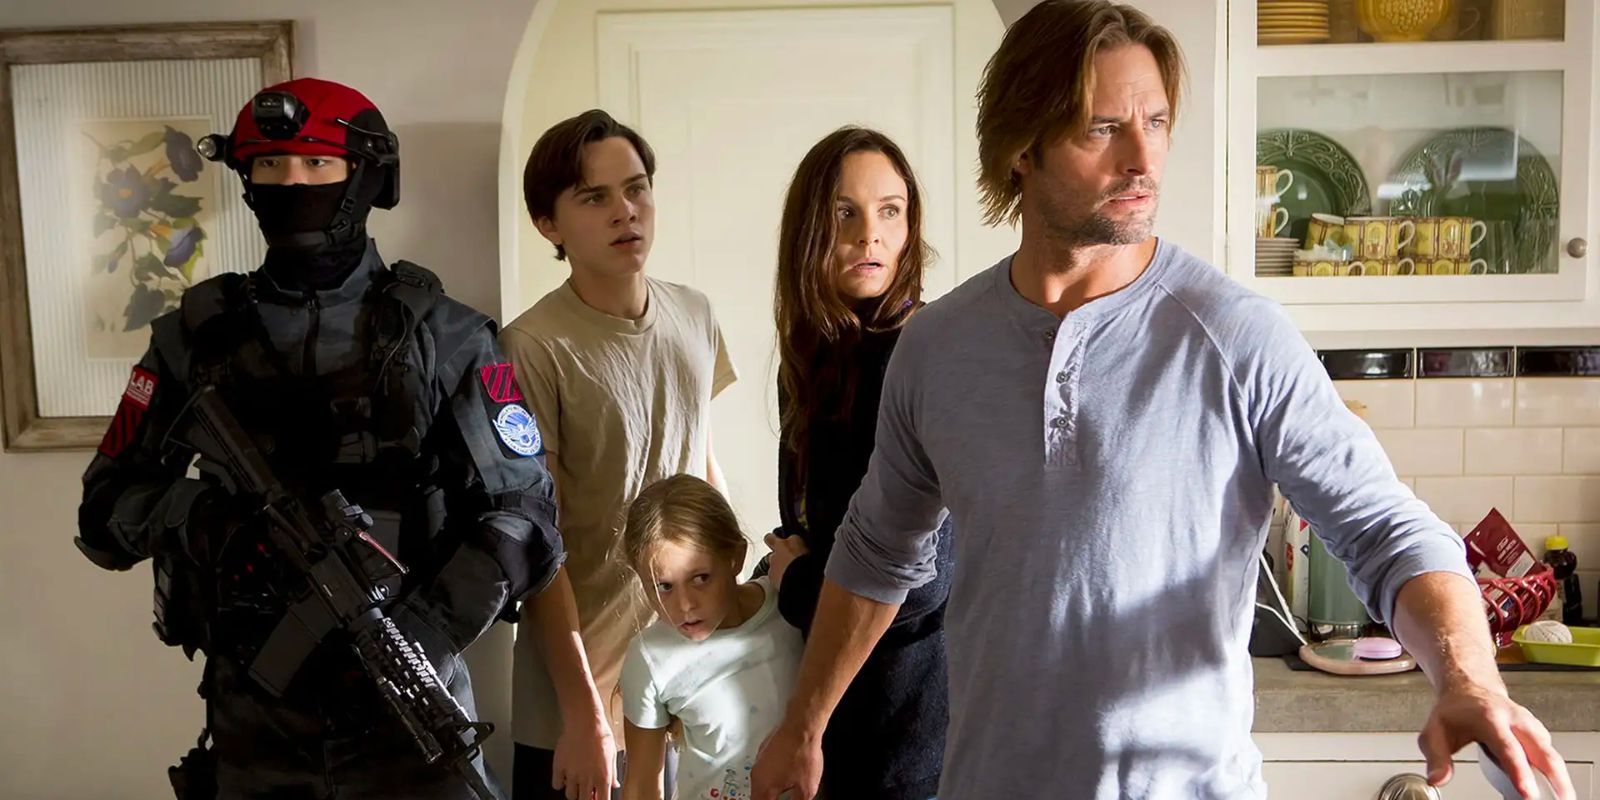 A family walks through the halls of a nice, suburban house while an armed soldier stands guard in the walkway.